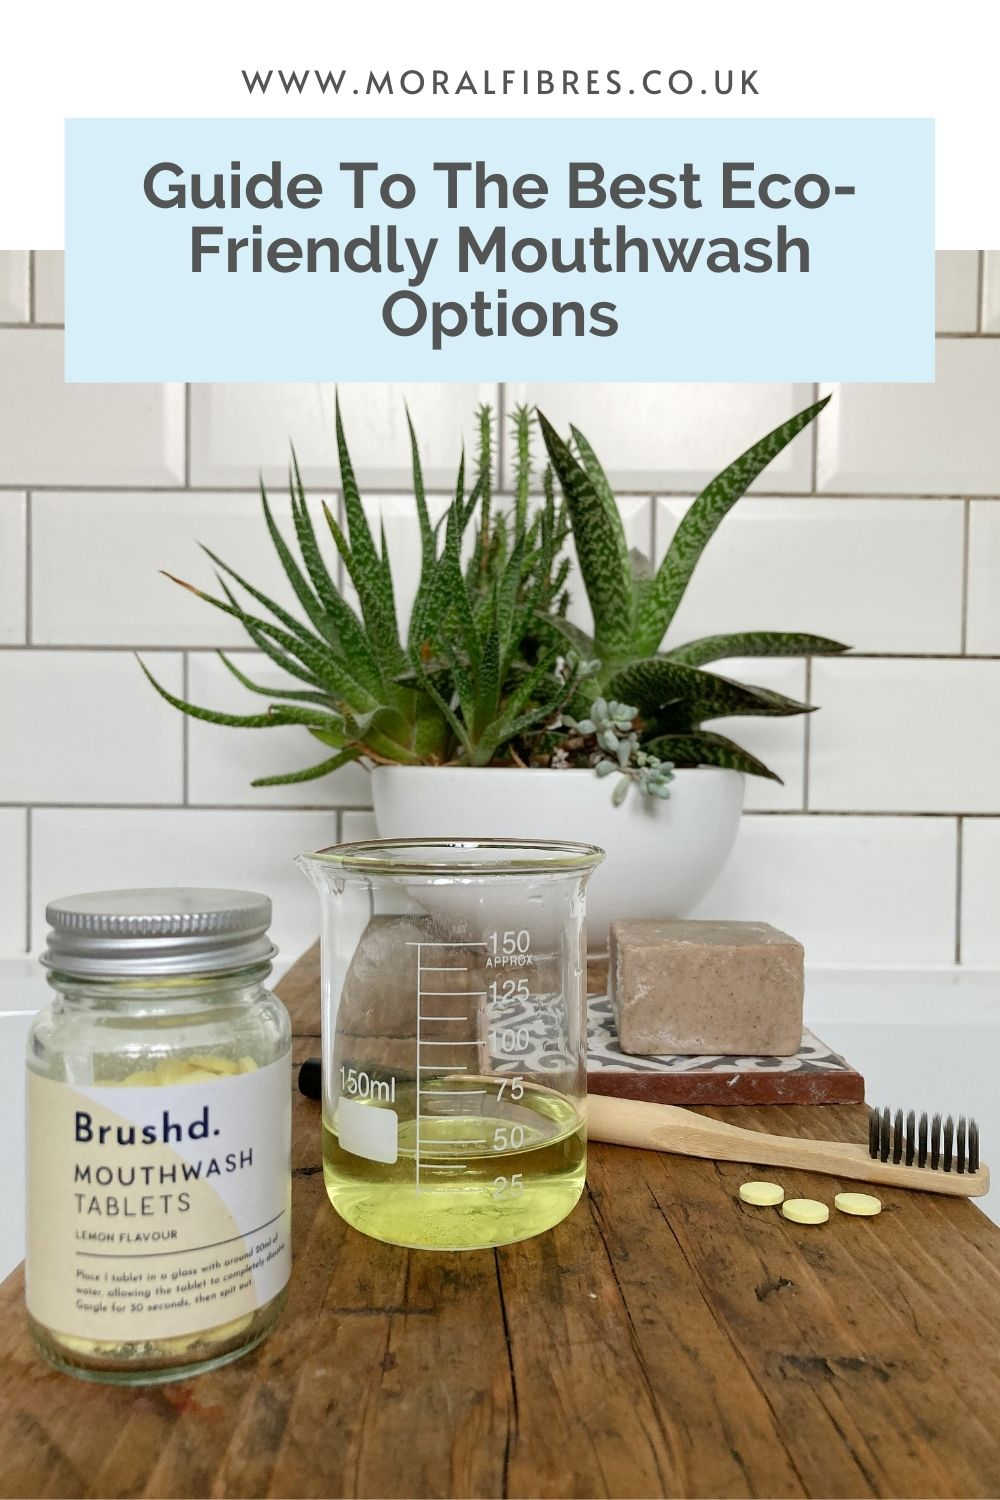 Mouthwash tablets on a wooden surface, with a blue text box that says guide to the best eco-friendly mouthwash options